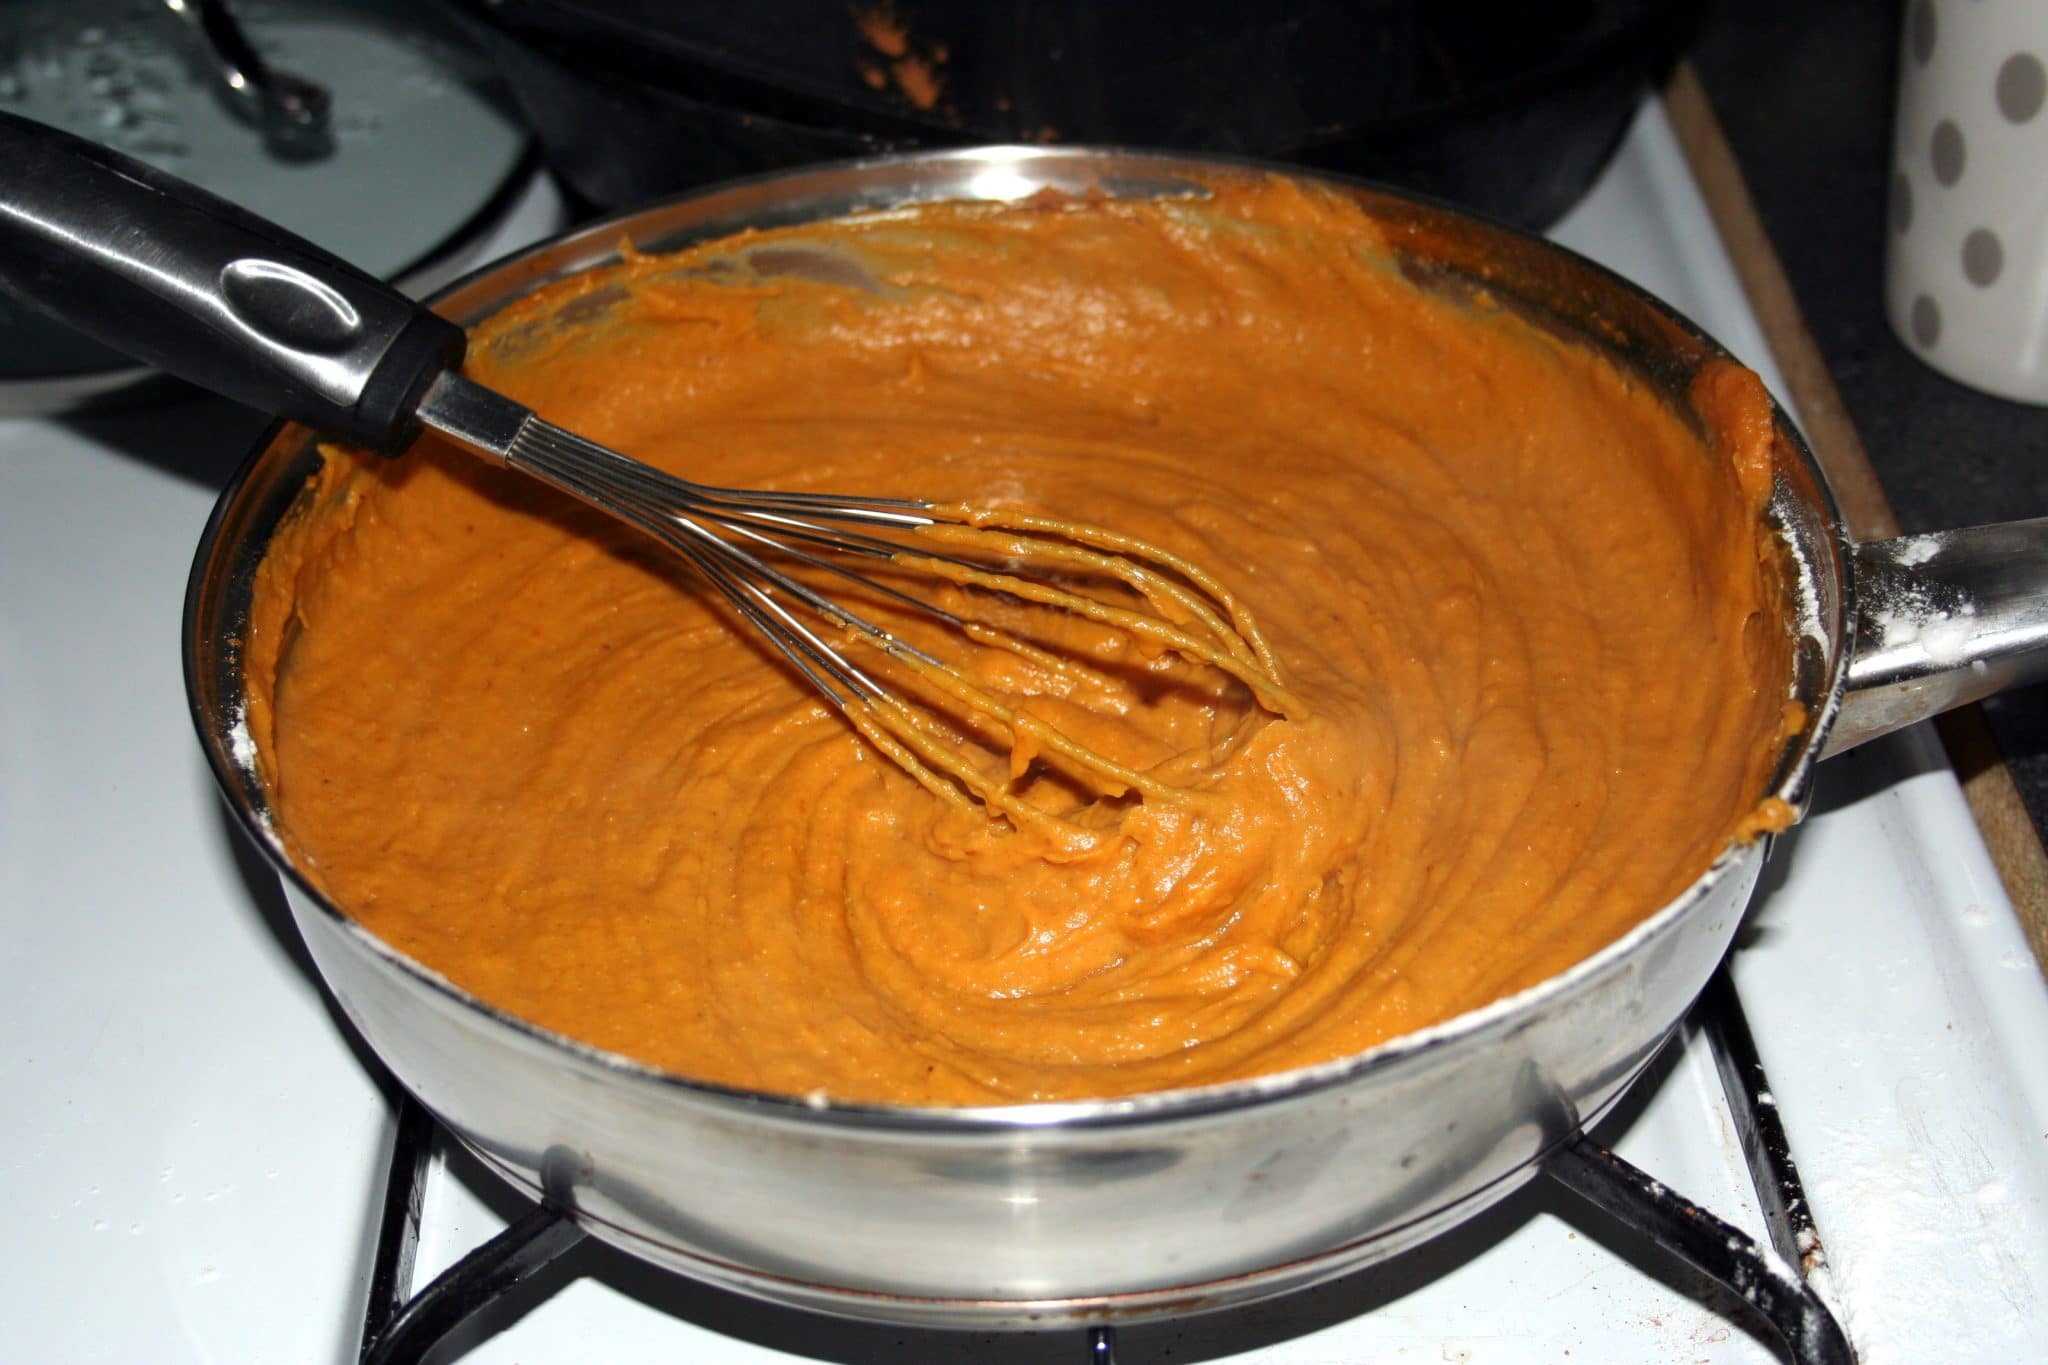 Pumpkin pie filling cooked on stove-top